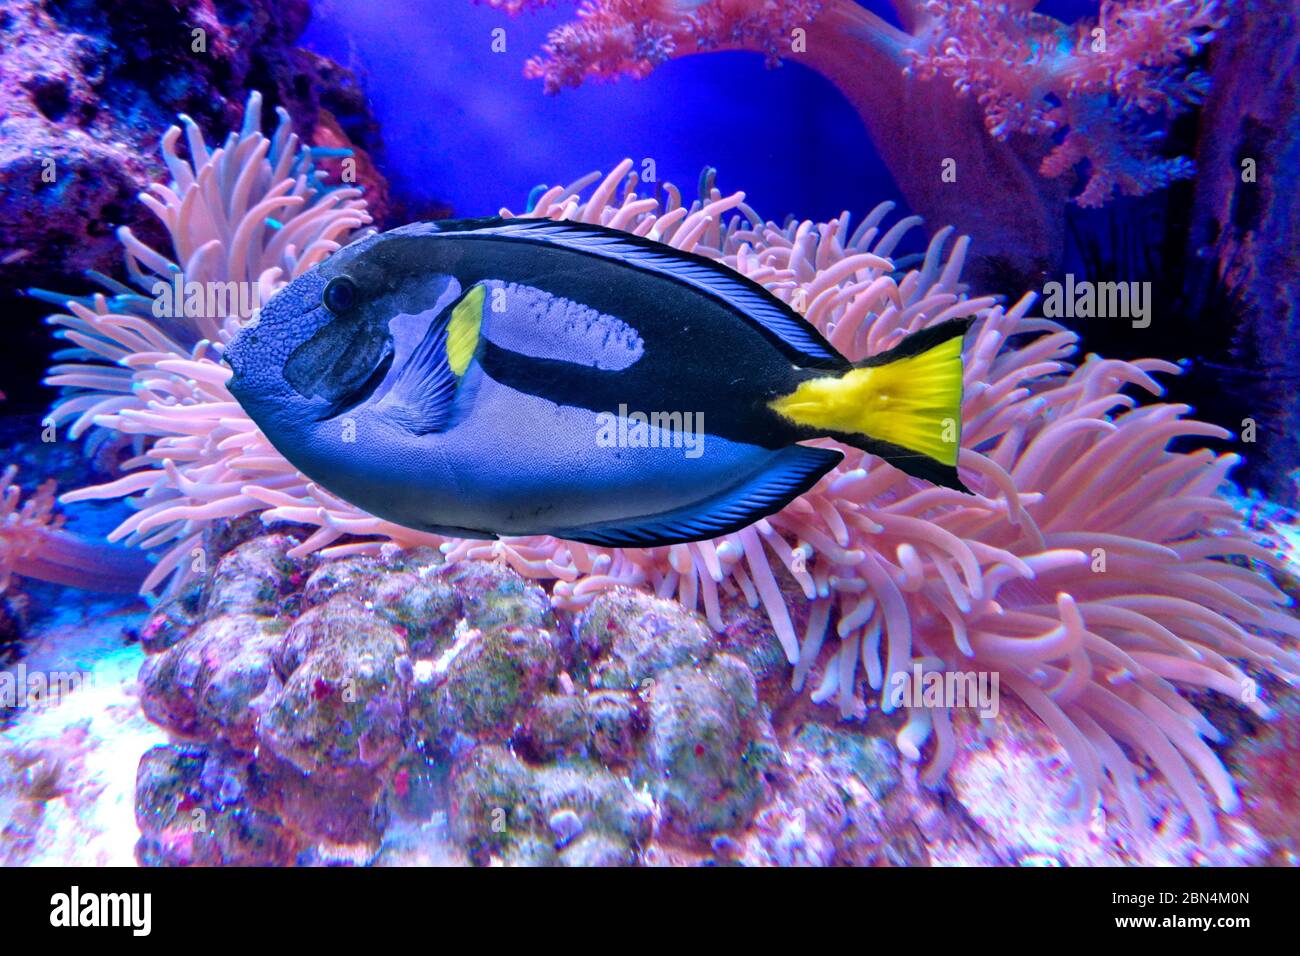 Blue fish with with yellow tail. Blue tang or Regal tang or Palette surgeonfish (Paracanthurus hepatus ) Stock Photo